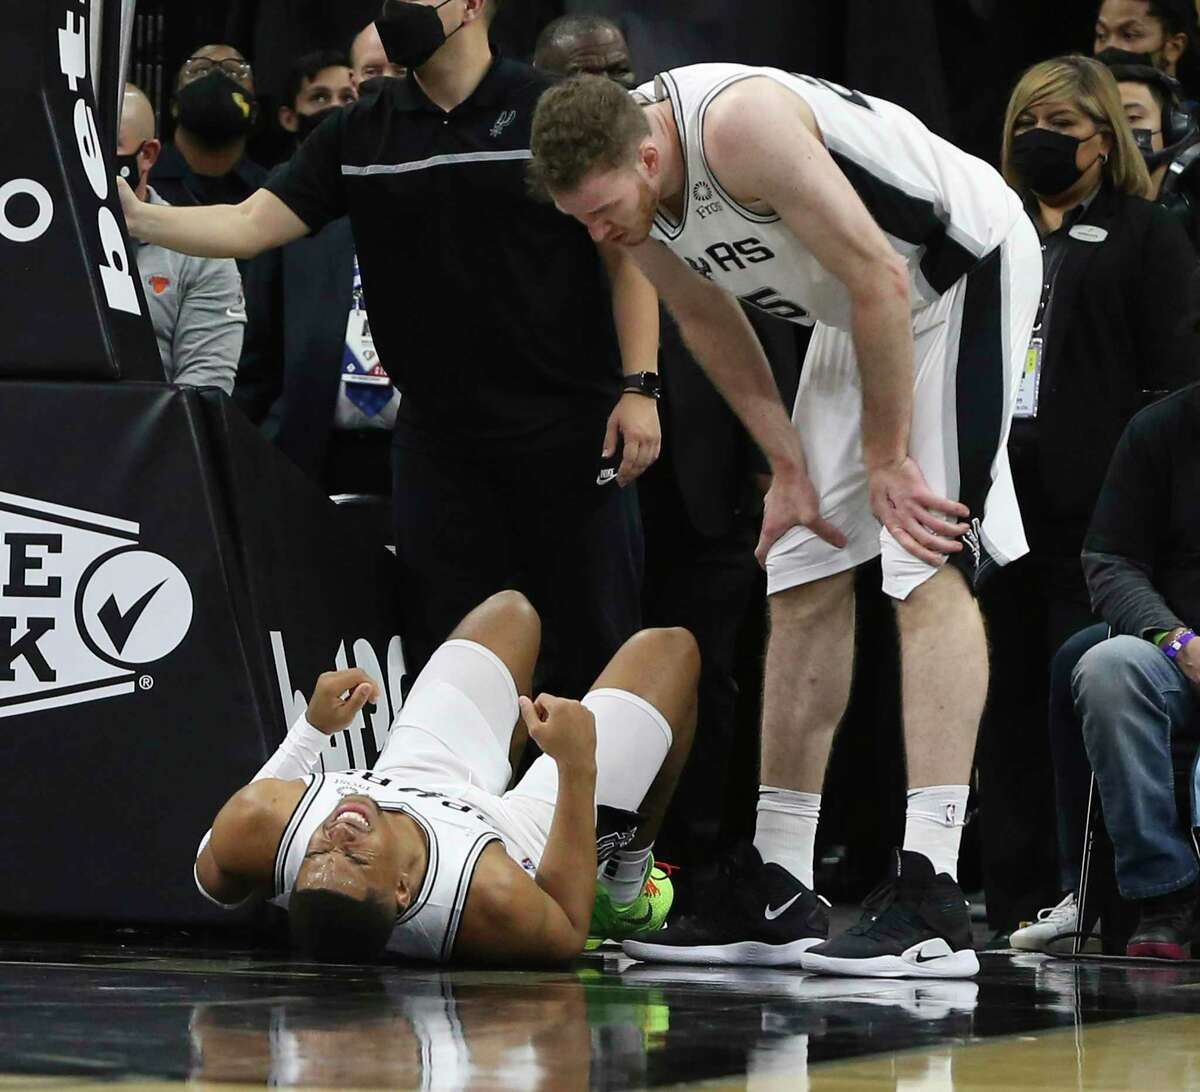 The Spurs’ Keldon Johnson (3) lies on the court in apparent pain as teammate Jakob Poeltl checks on him near the end of the first half against the New York Knicks at the AT&T Center on Tuesday, Dec. 7, 2021.